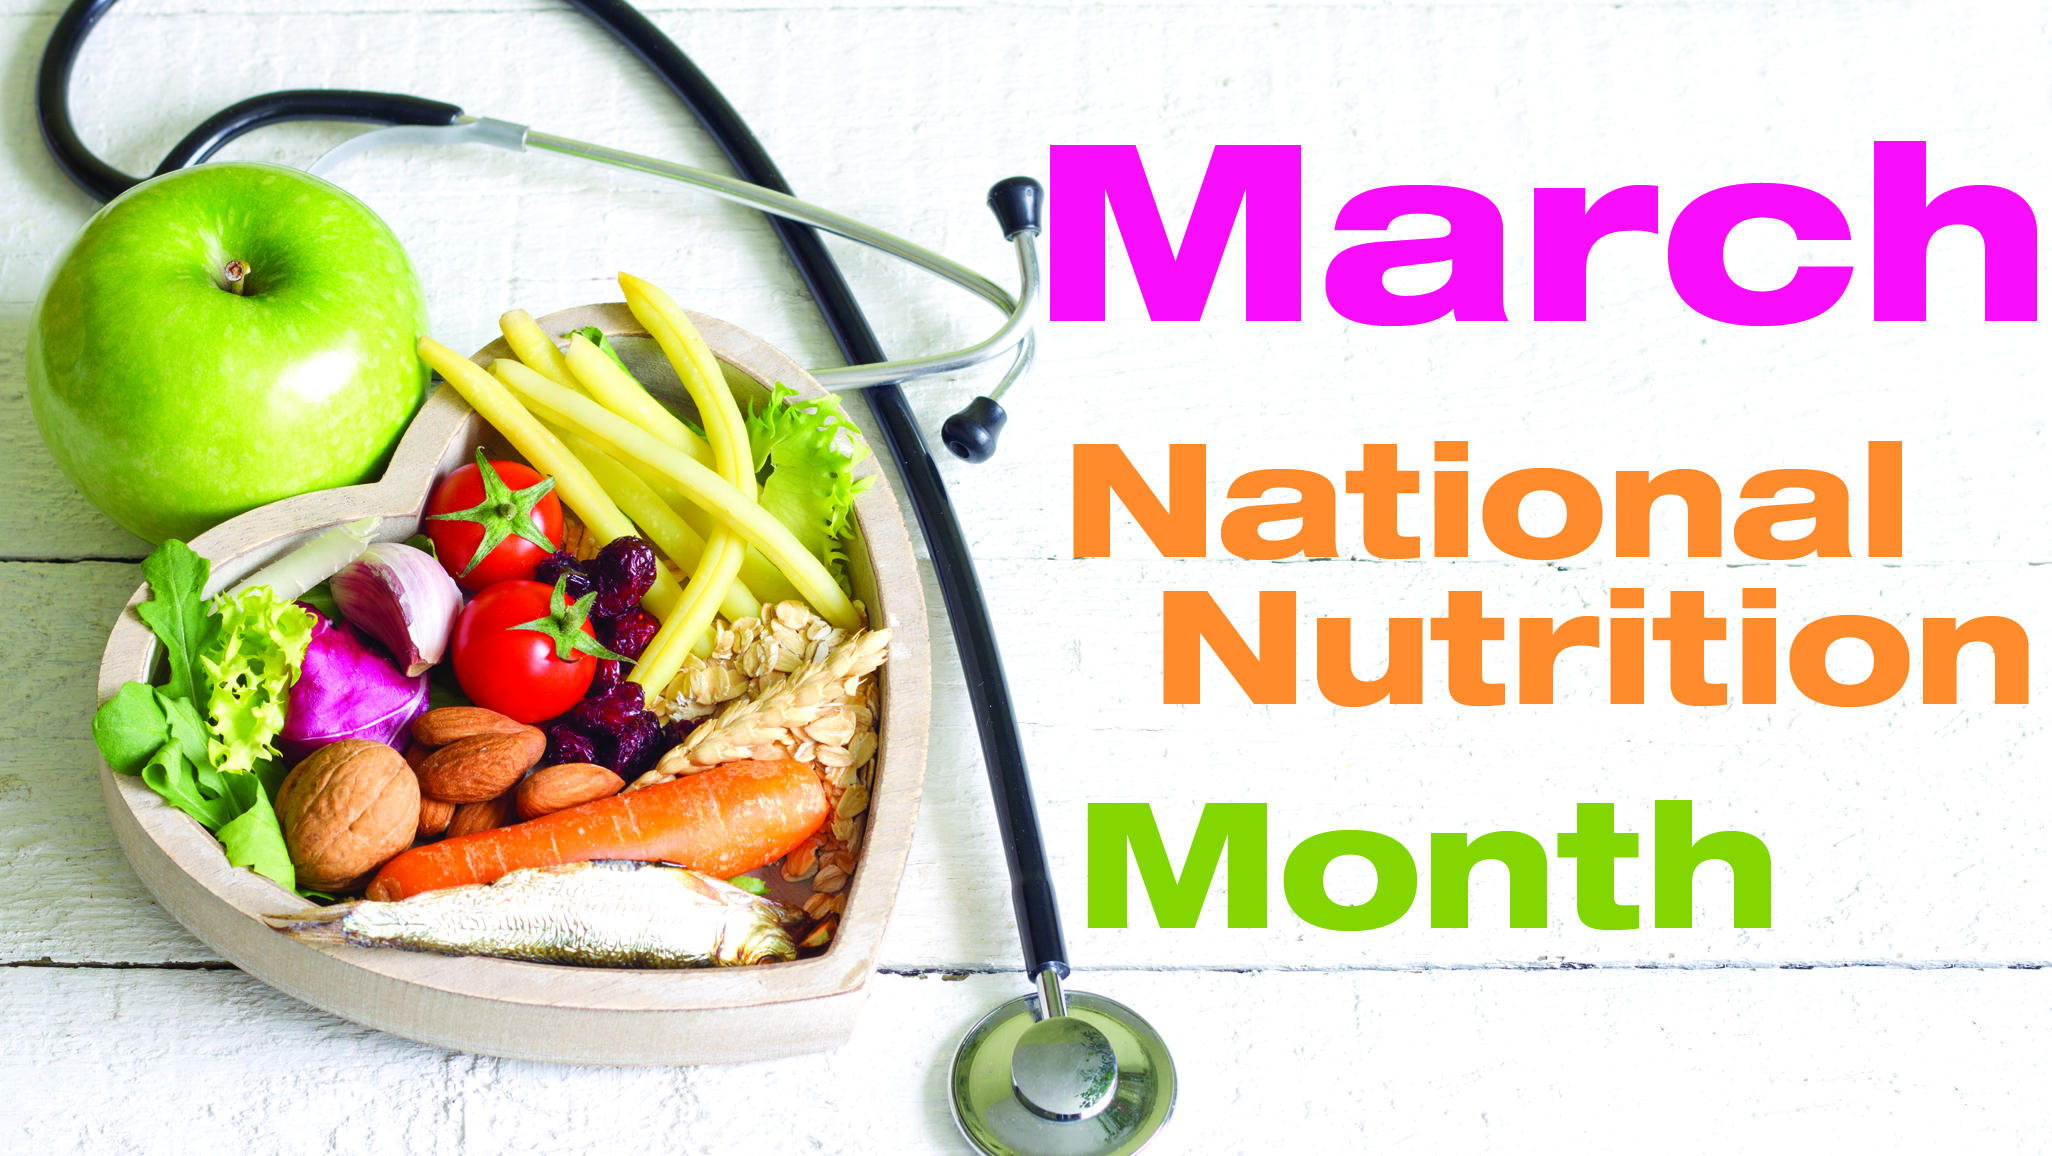 5 more tips for National Nutrition Month